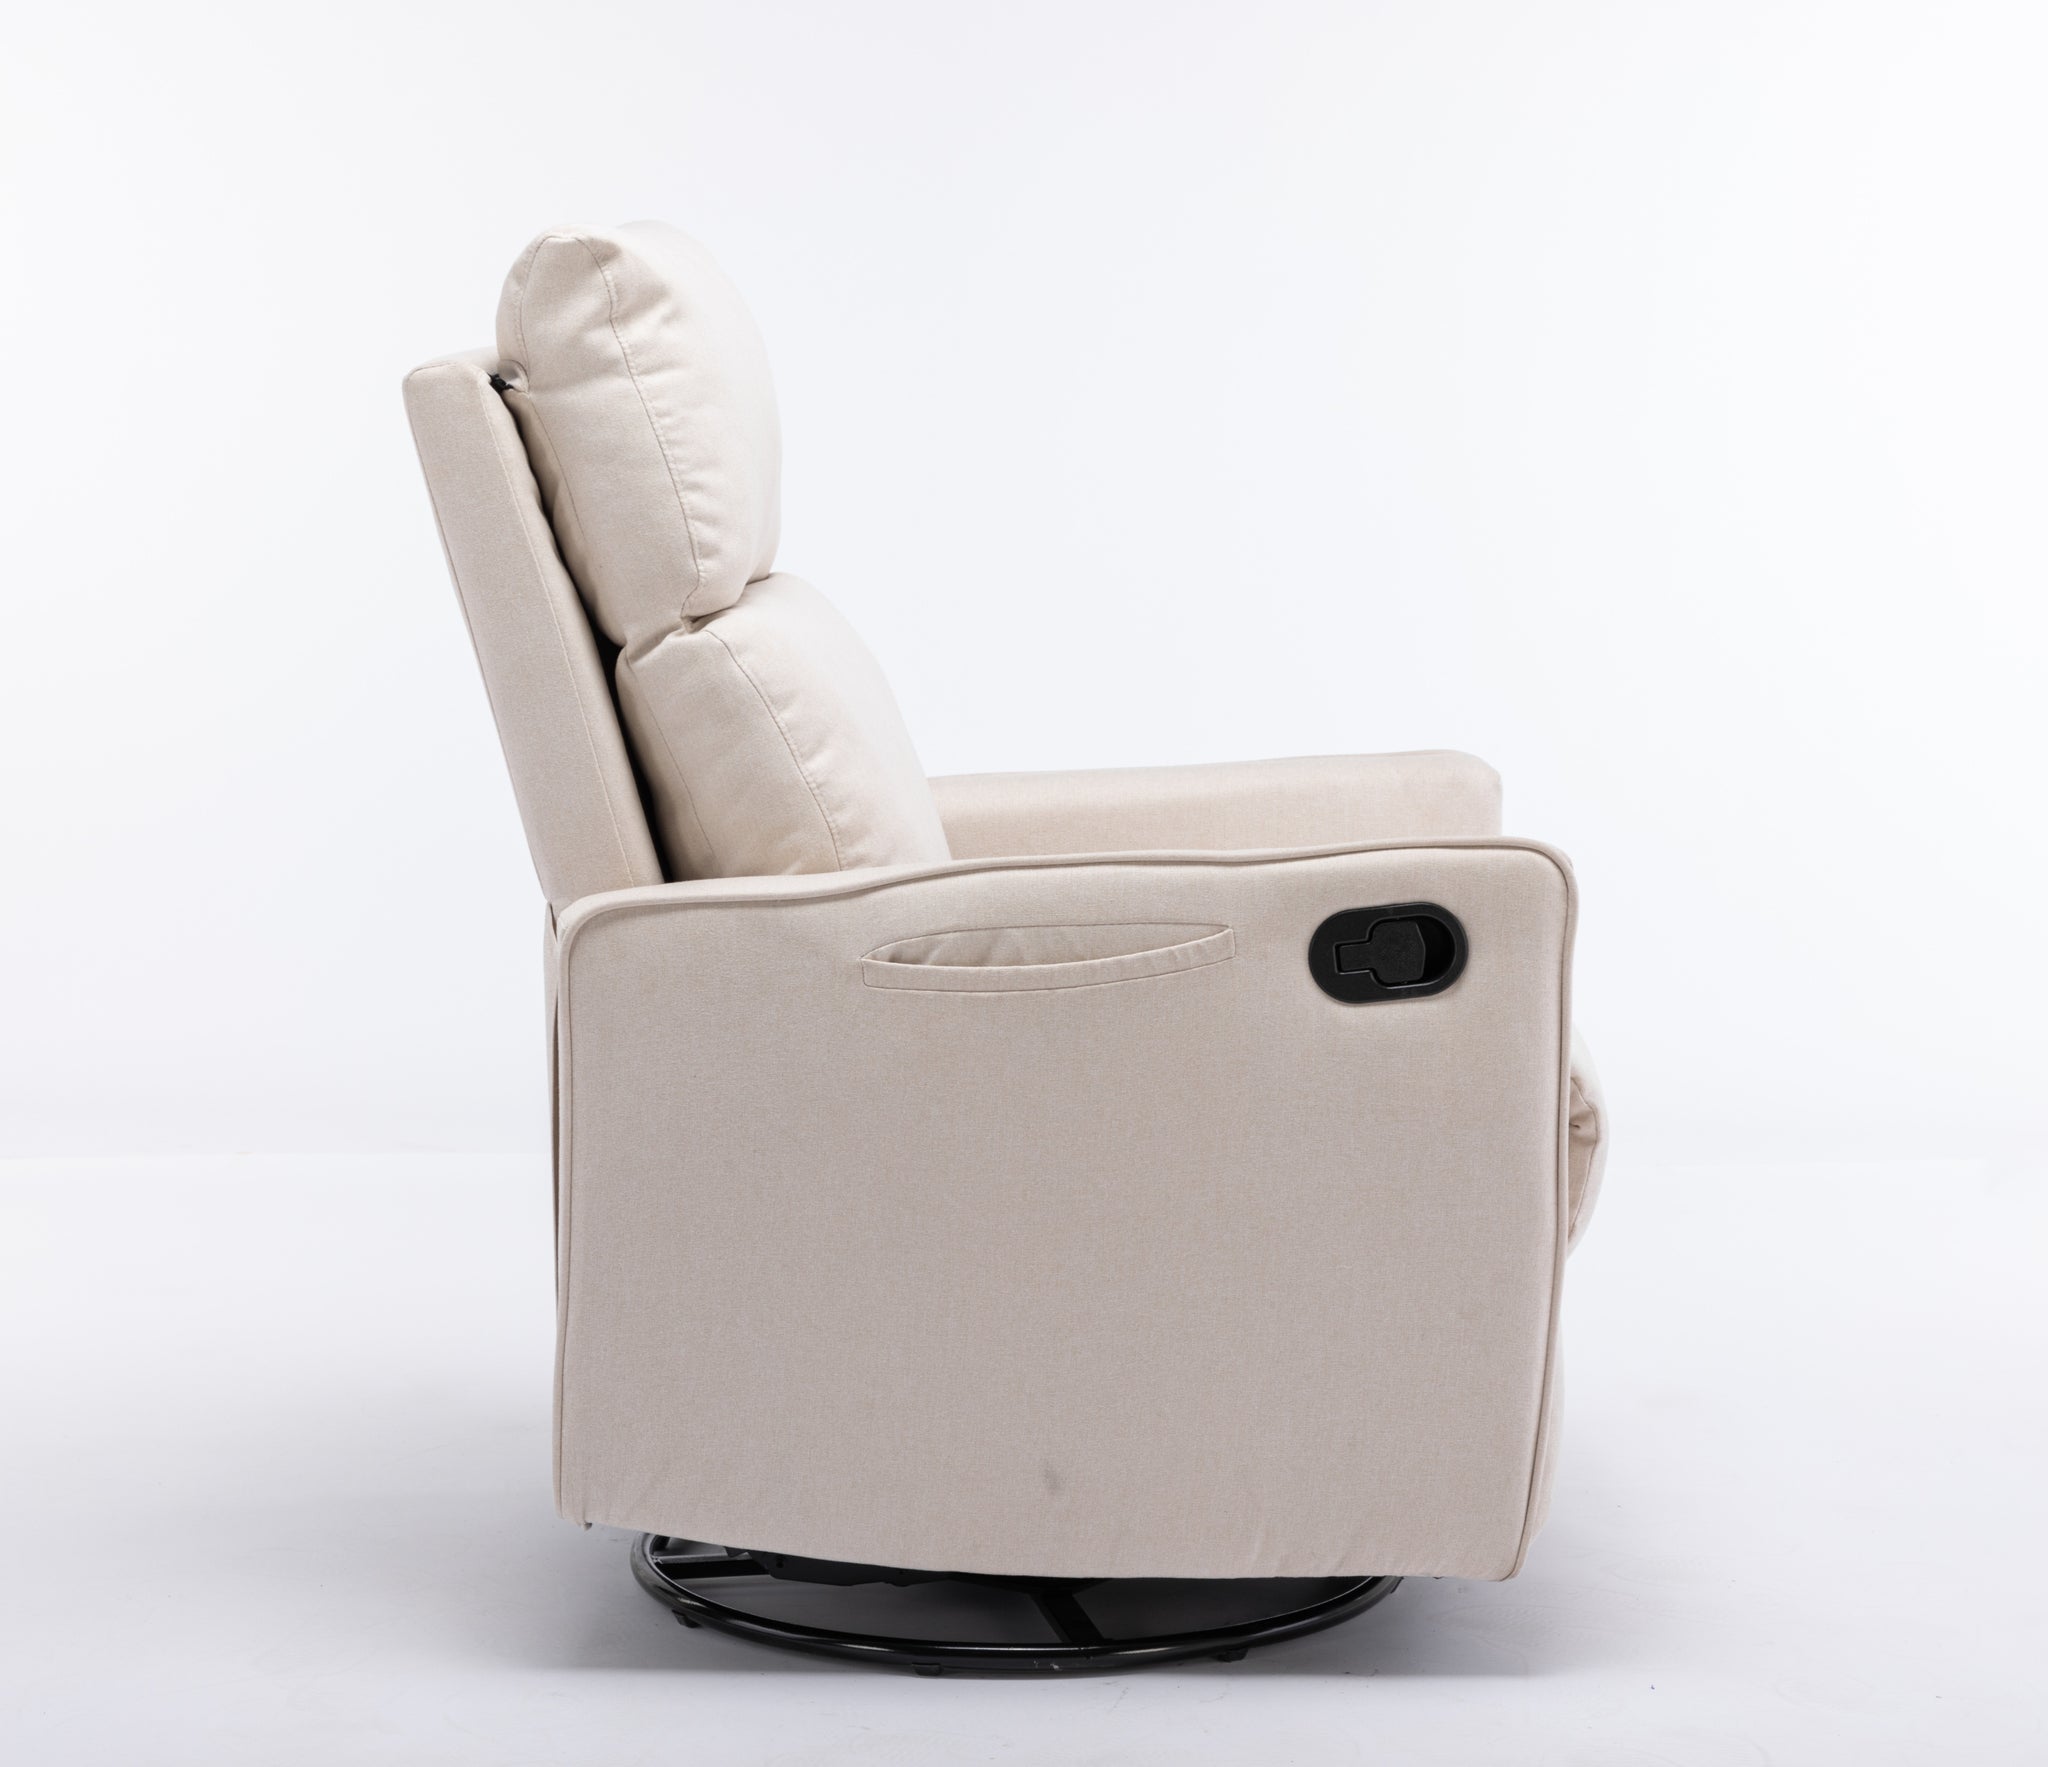 038 Cotton Linen Fabric Swivel Rocking Chair Glider beige-cotton-manual-handle-metal-primary living